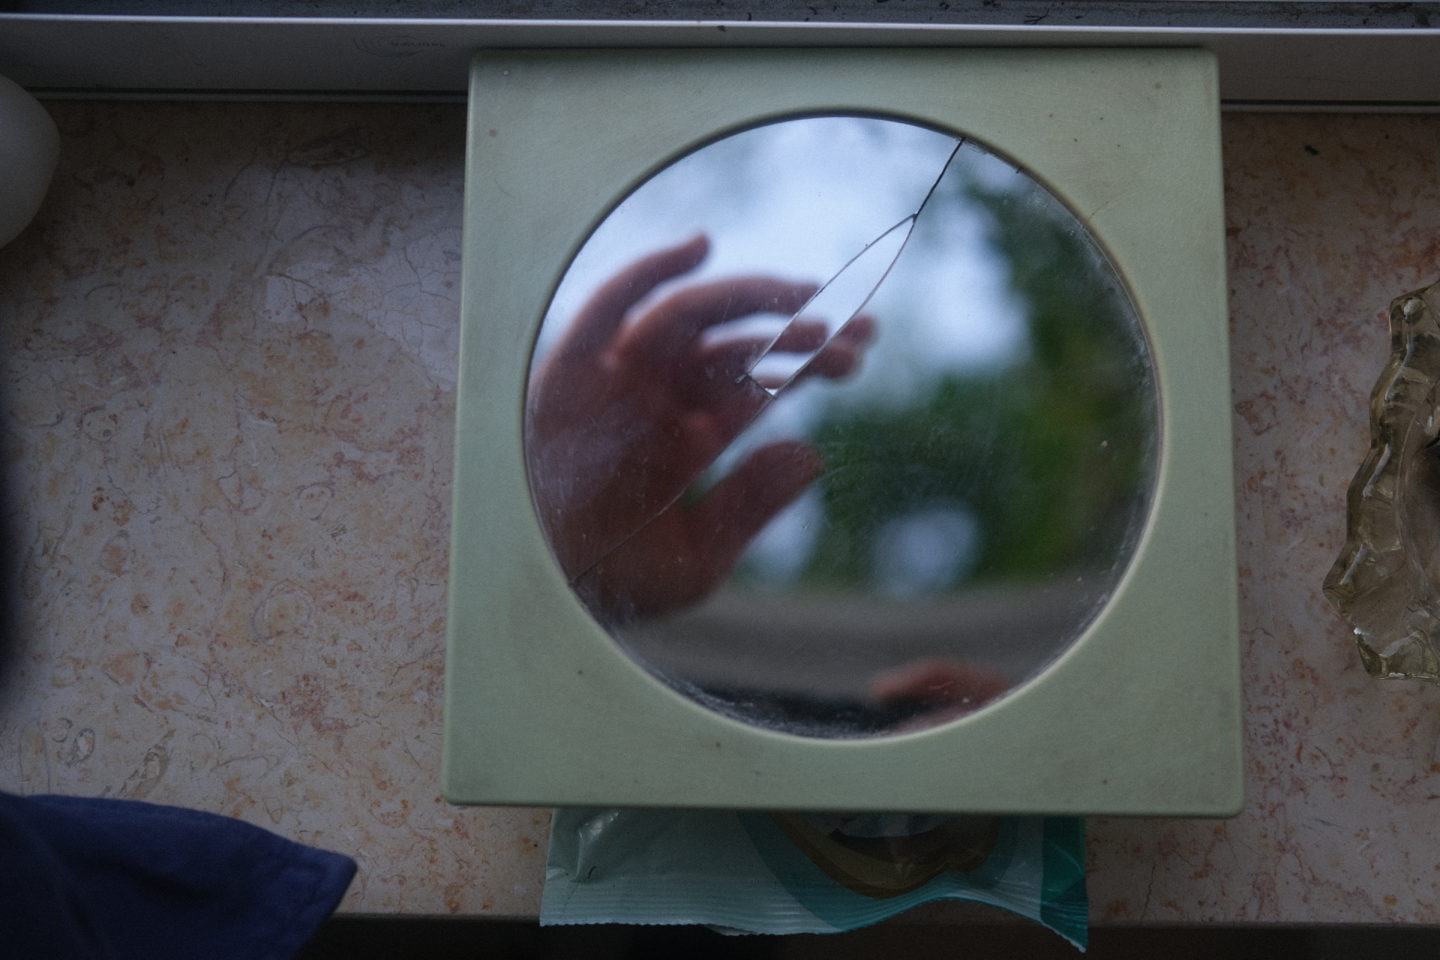 A cracked mirror with a hand reflected in it